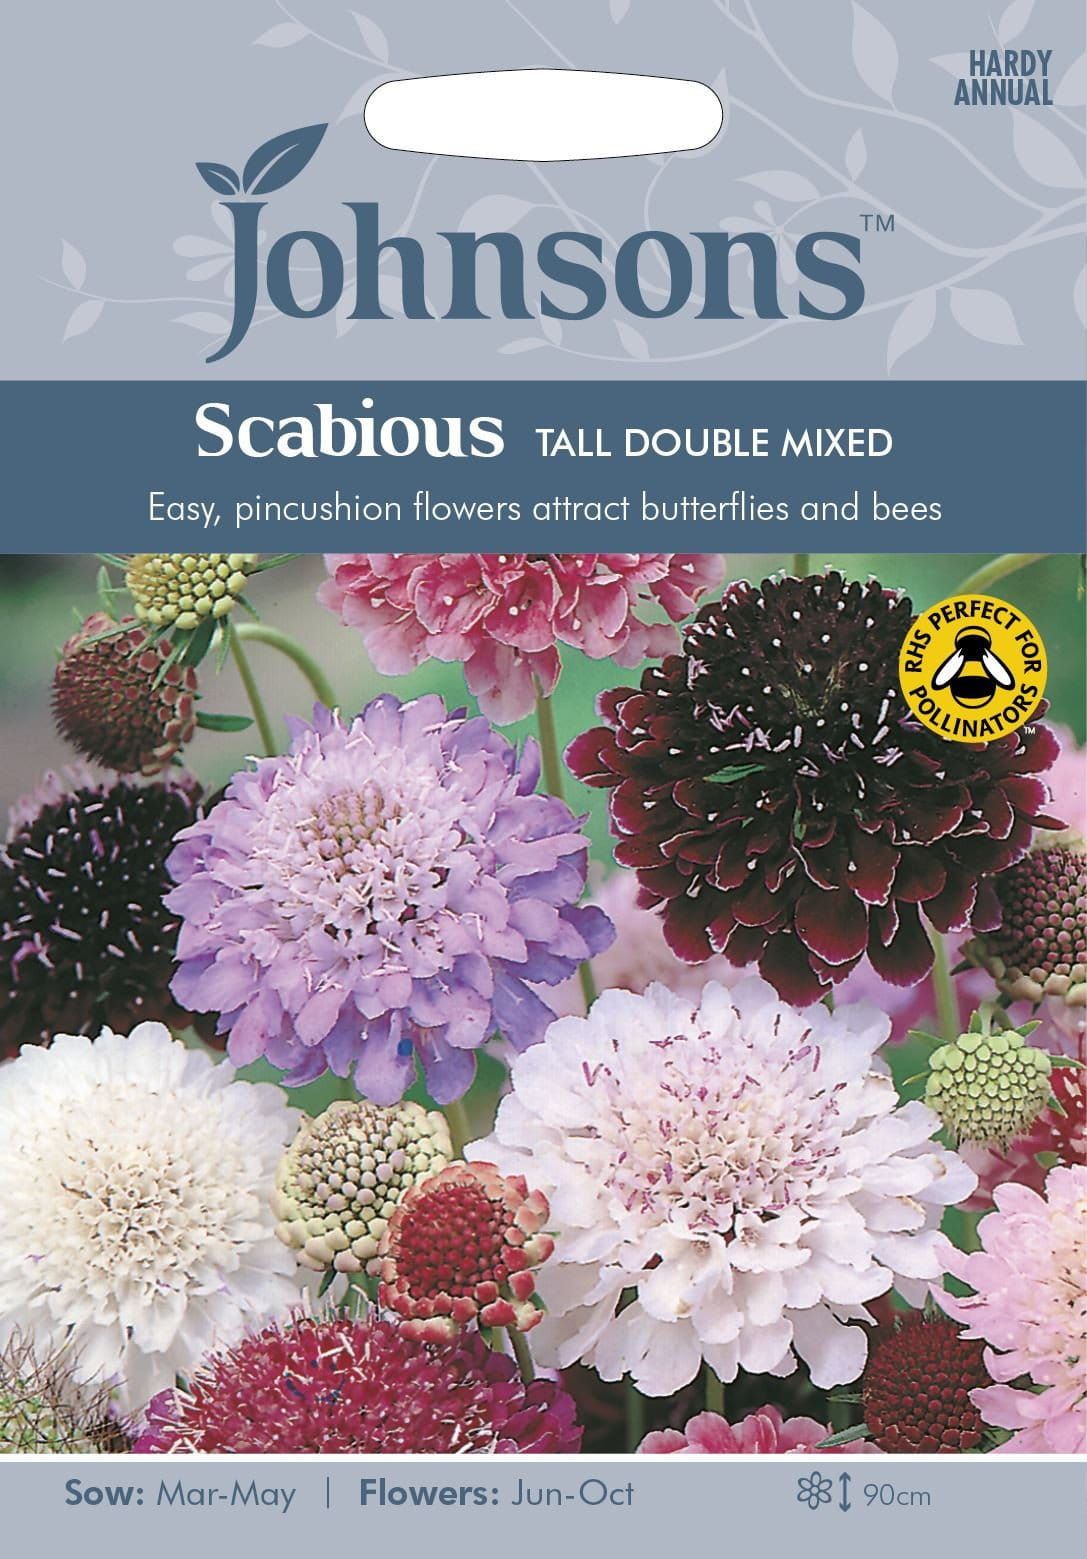 Johnsons Scabious Tall Double Mixed 50 Seeds